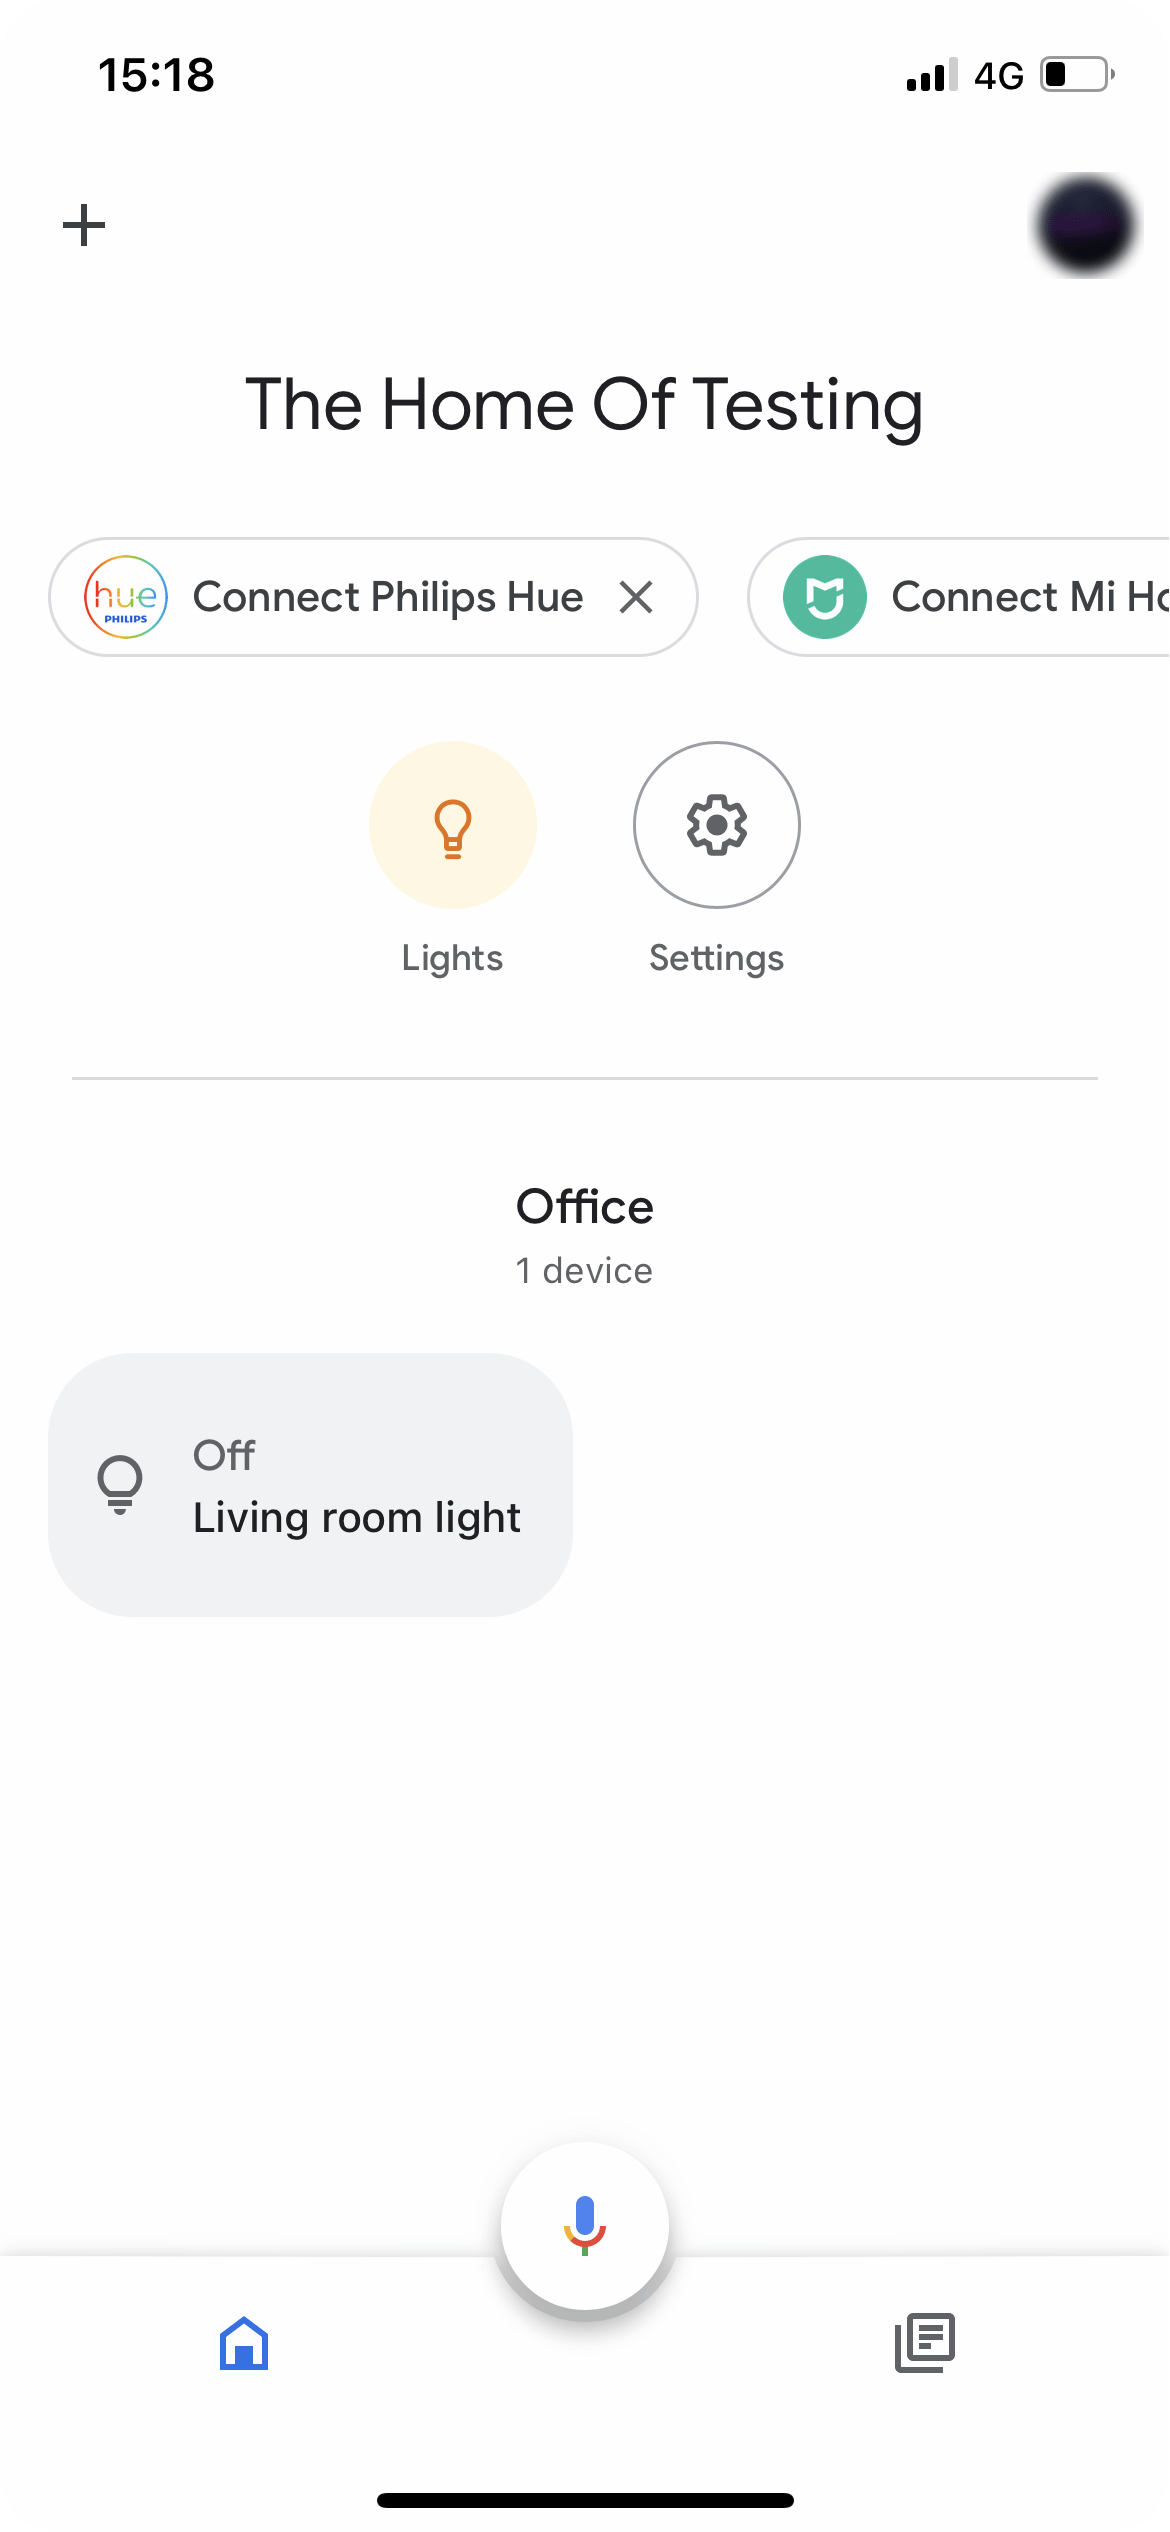 How to link the devices within the Google home App | List of devices added in the Home